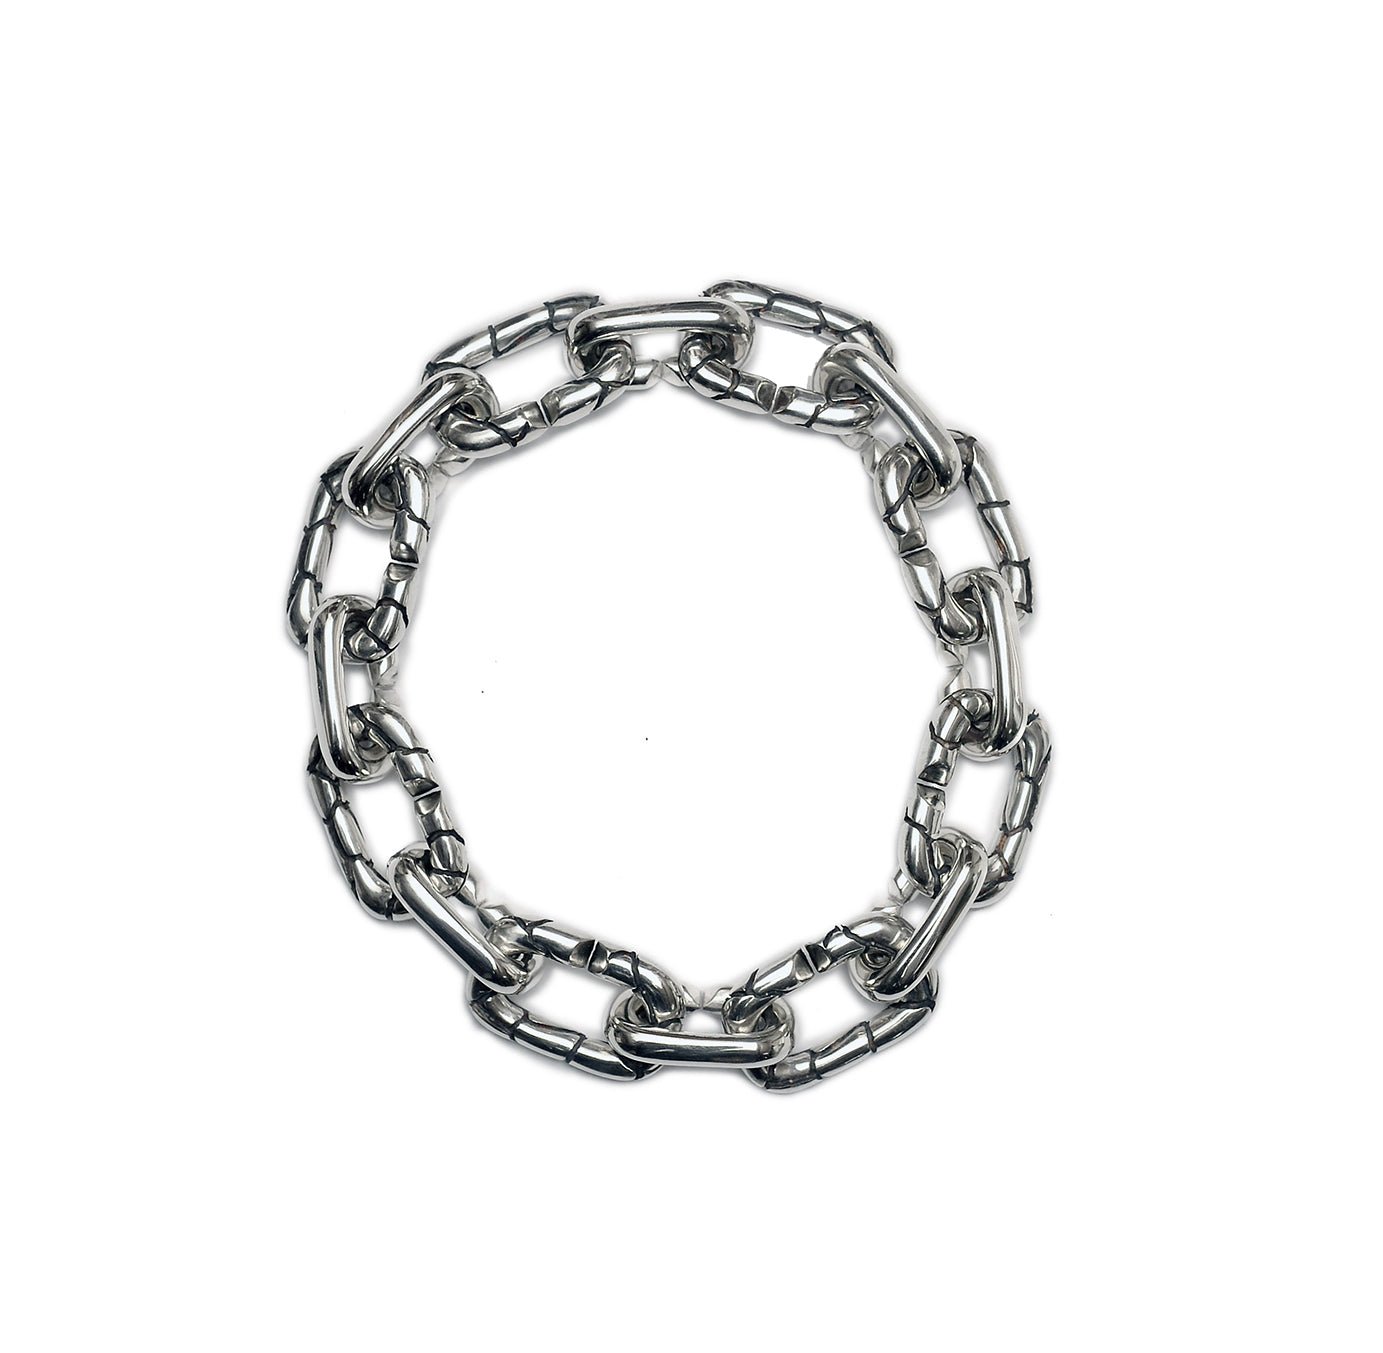 Continue - Sterling silver bracelet with thick chain combination - Avant Gardist